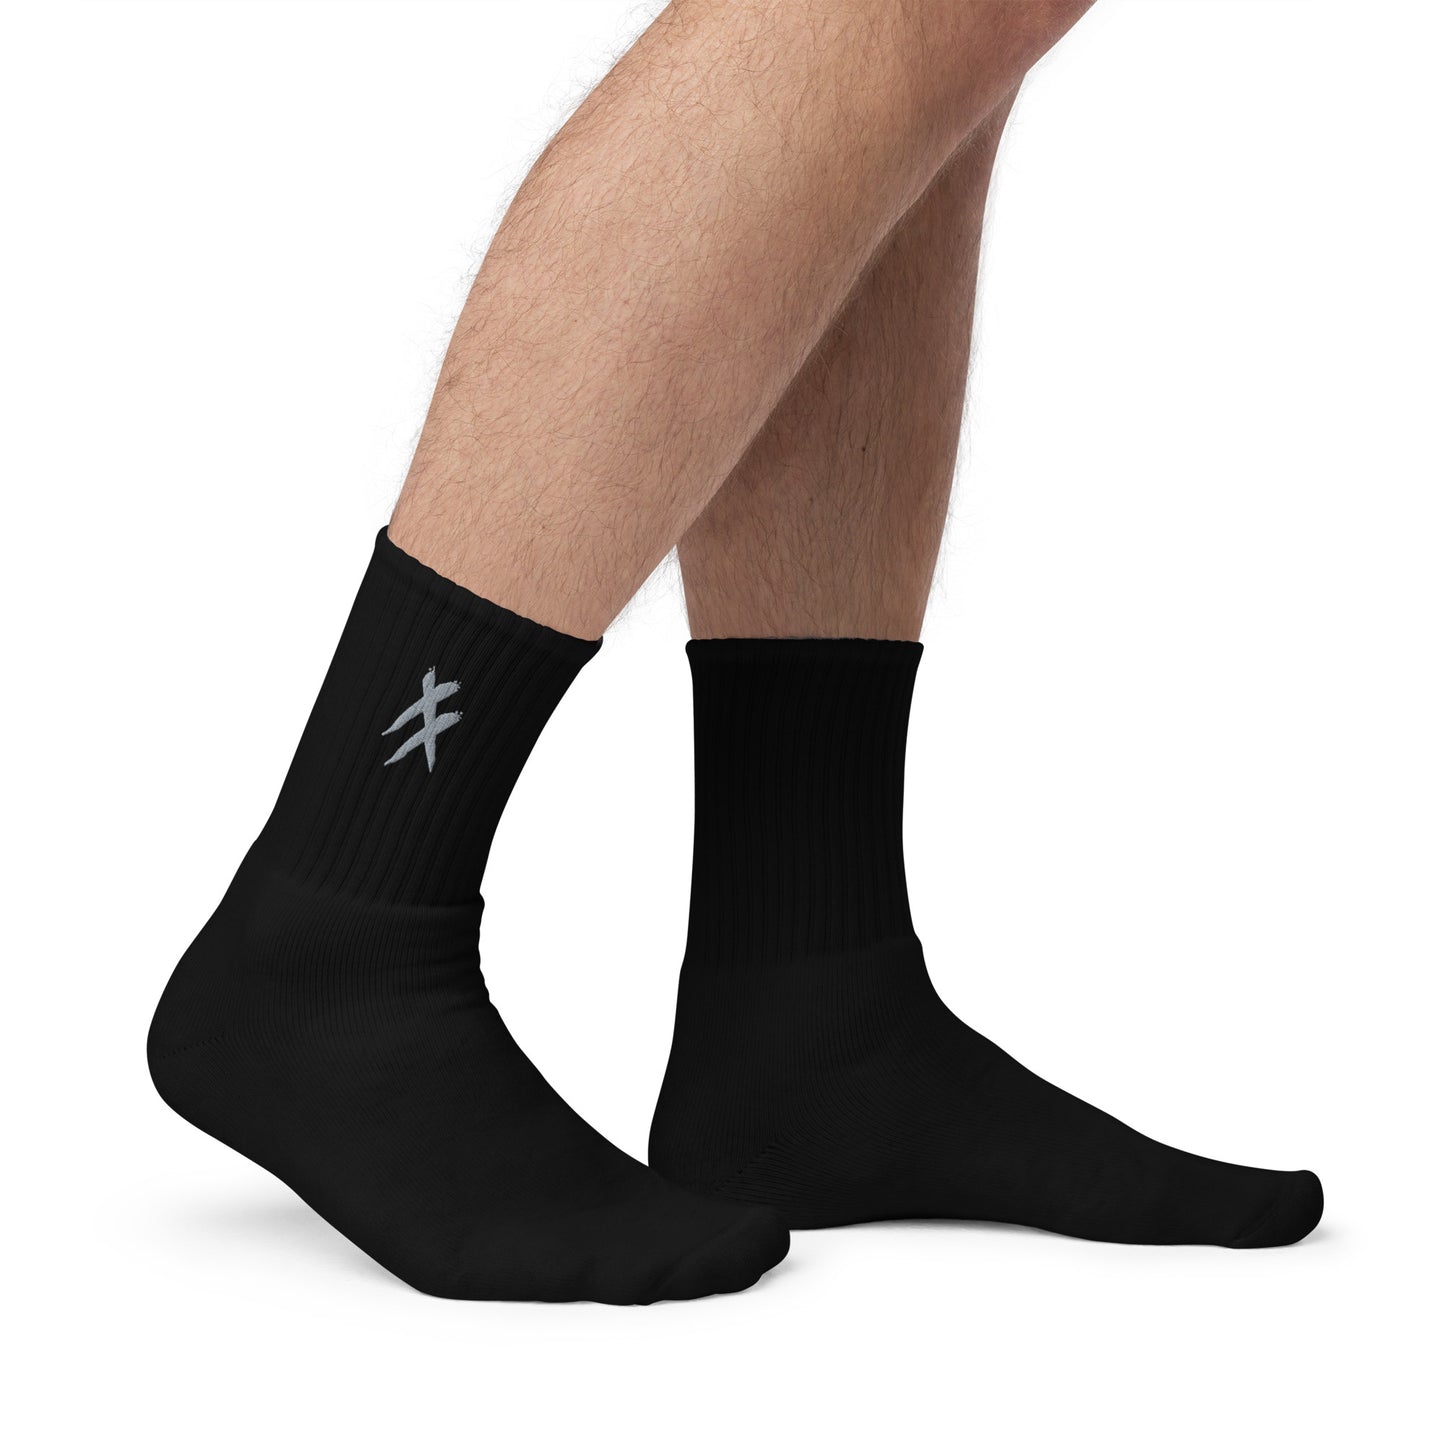 Silver X's - Embroidered socks